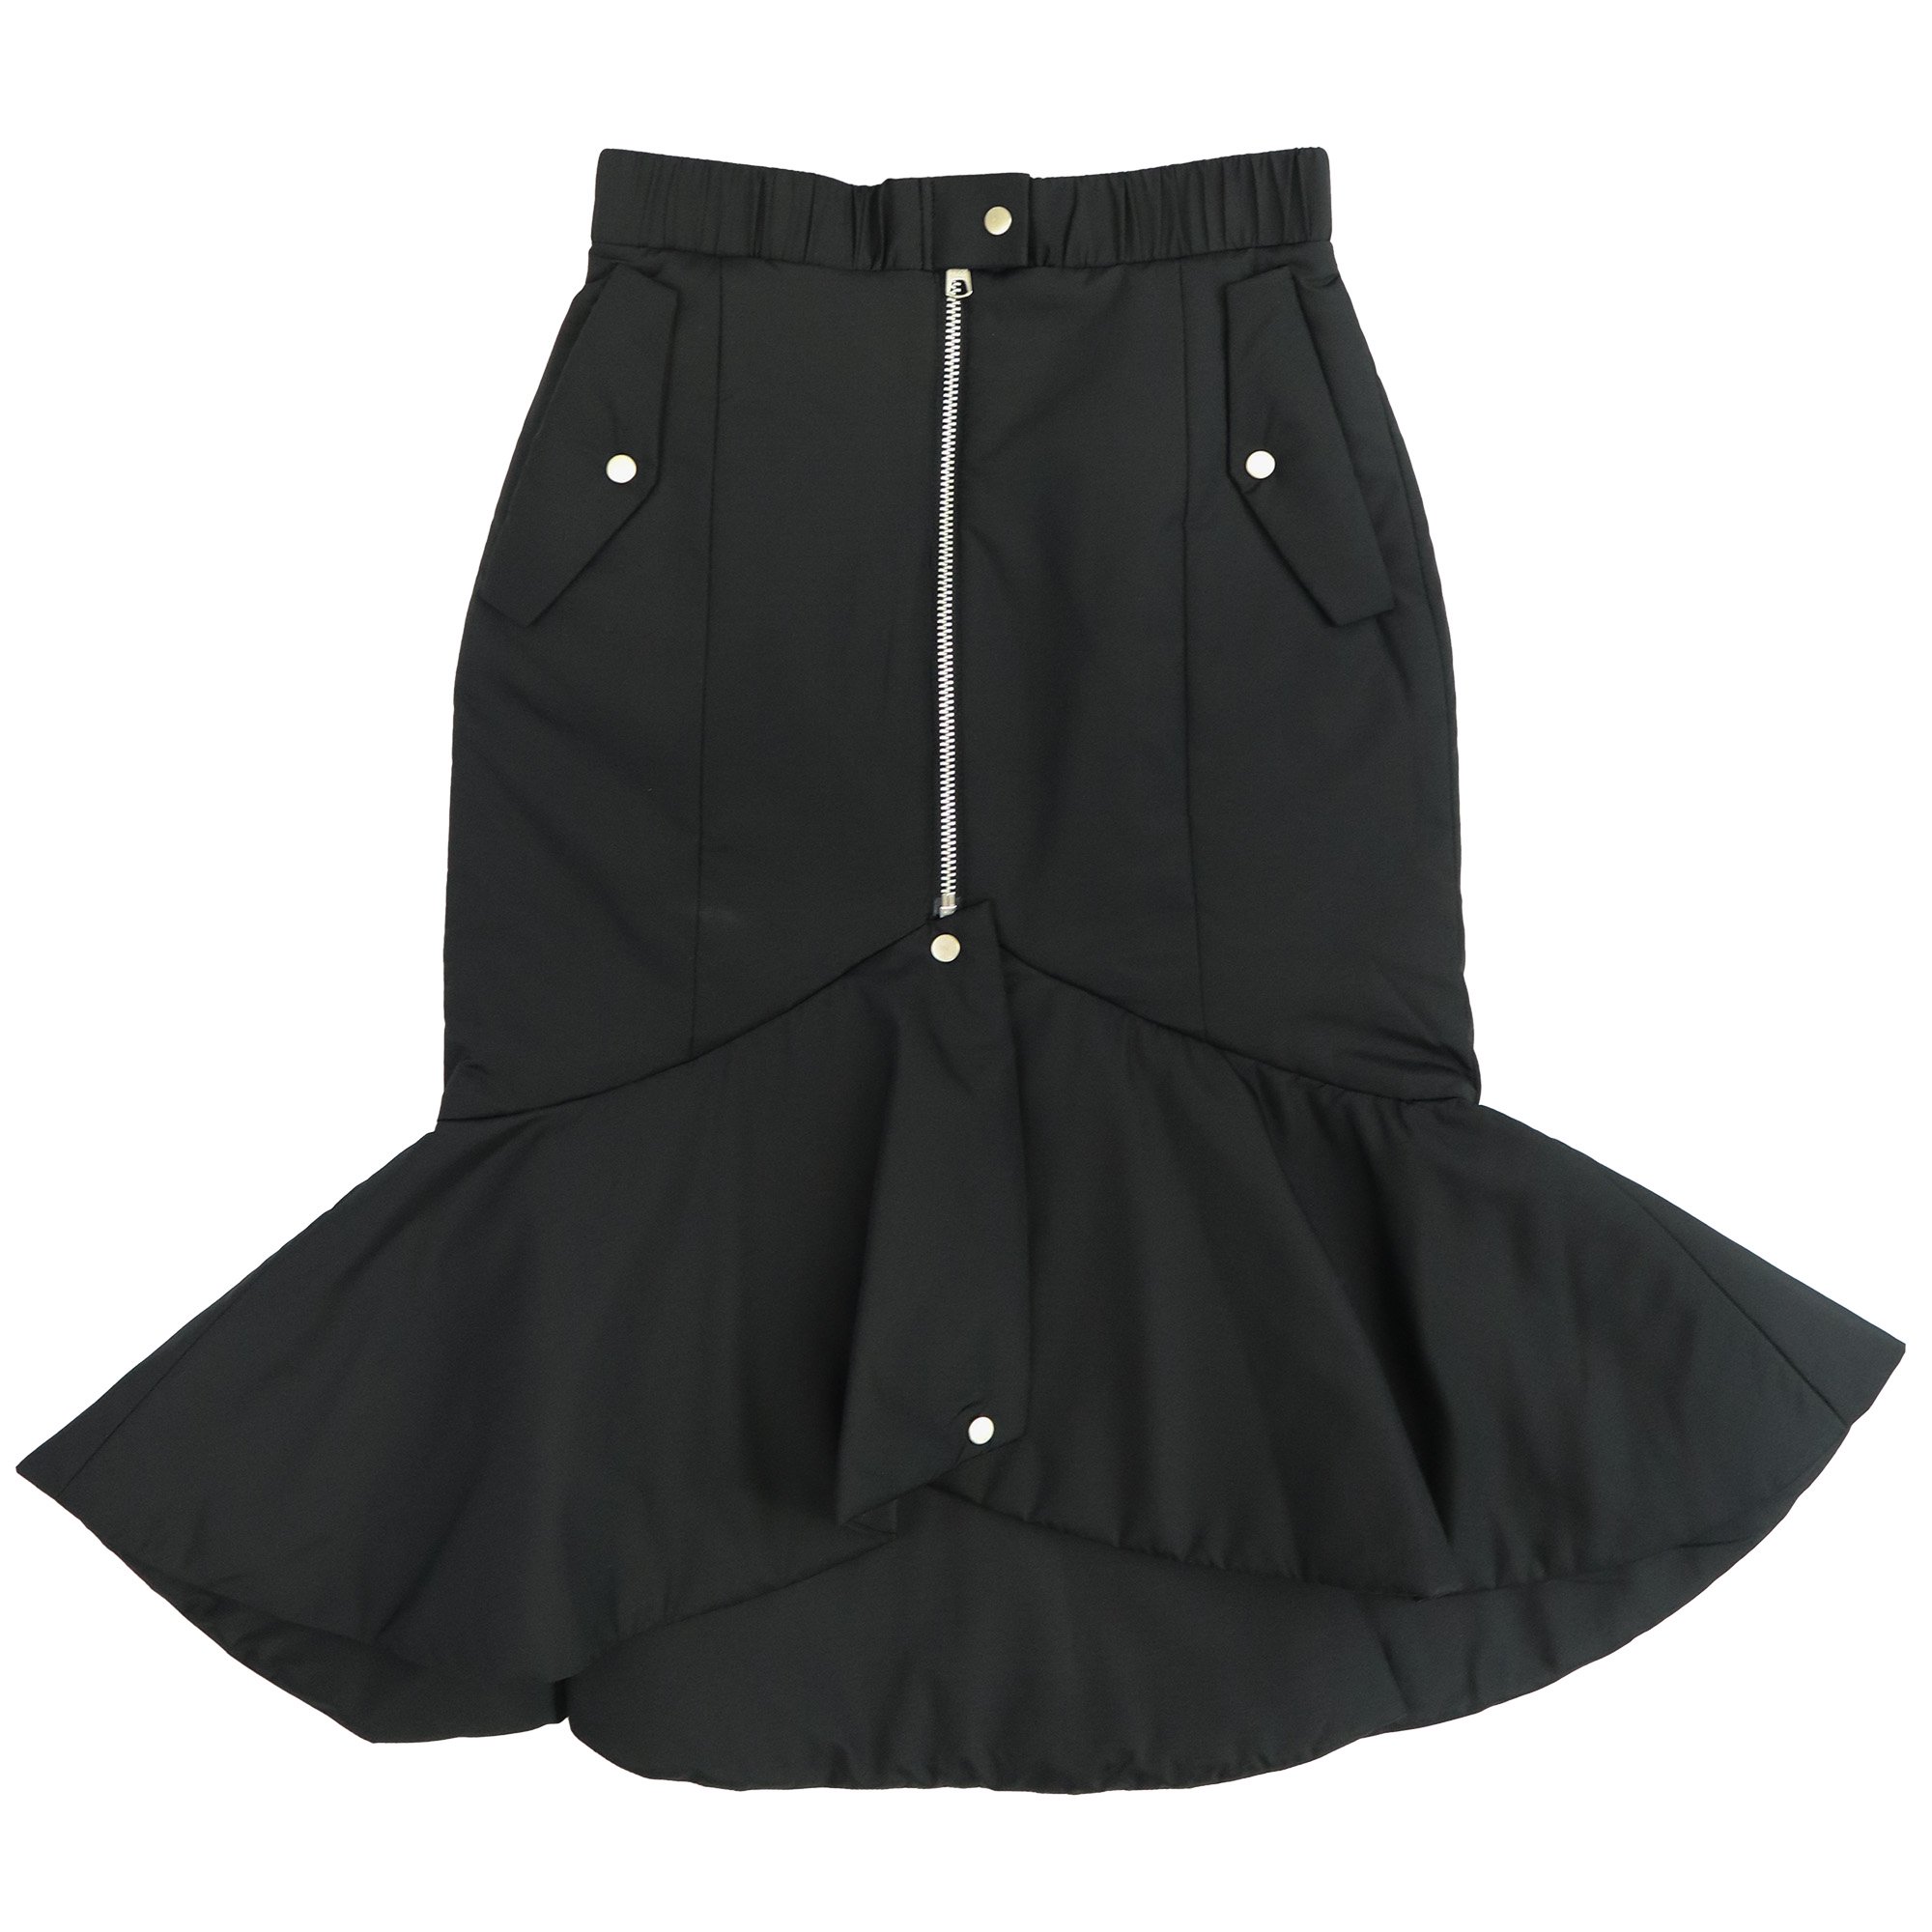 <img class='new_mark_img1' src='https://img.shop-pro.jp/img/new/icons47.gif' style='border:none;display:inline;margin:0px;padding:0px;width:auto;' />BESFXXK FLARE SKIRT【BLACK】